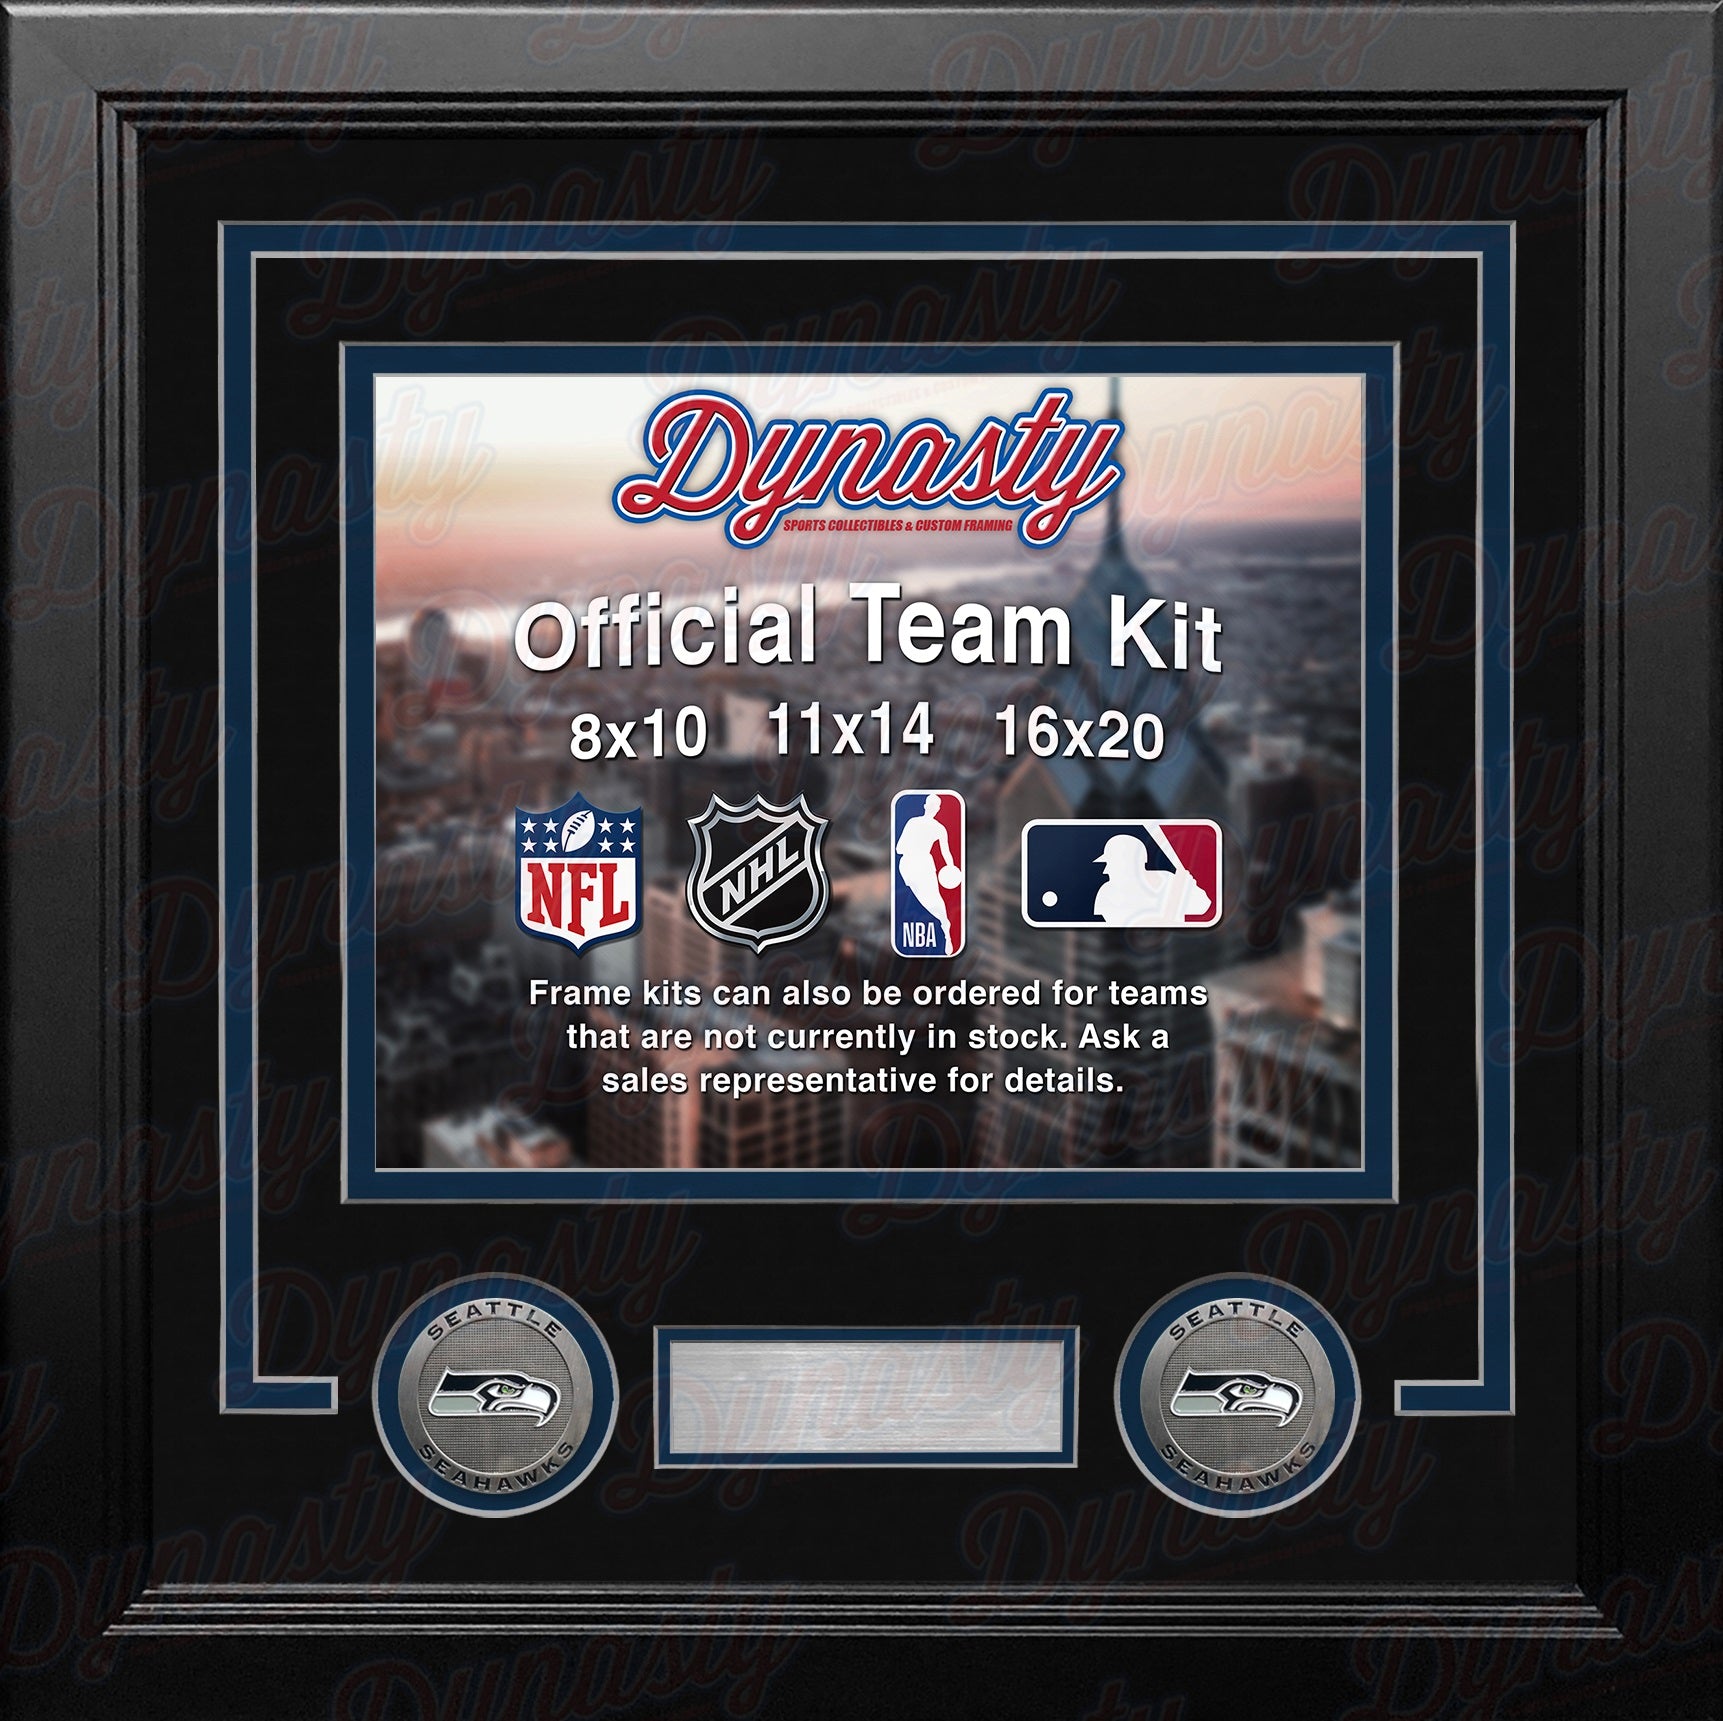 Seattle Seahawks Custom NFL Football 8x10 Picture Frame Kit (Multiple Colors) - Dynasty Sports & Framing 